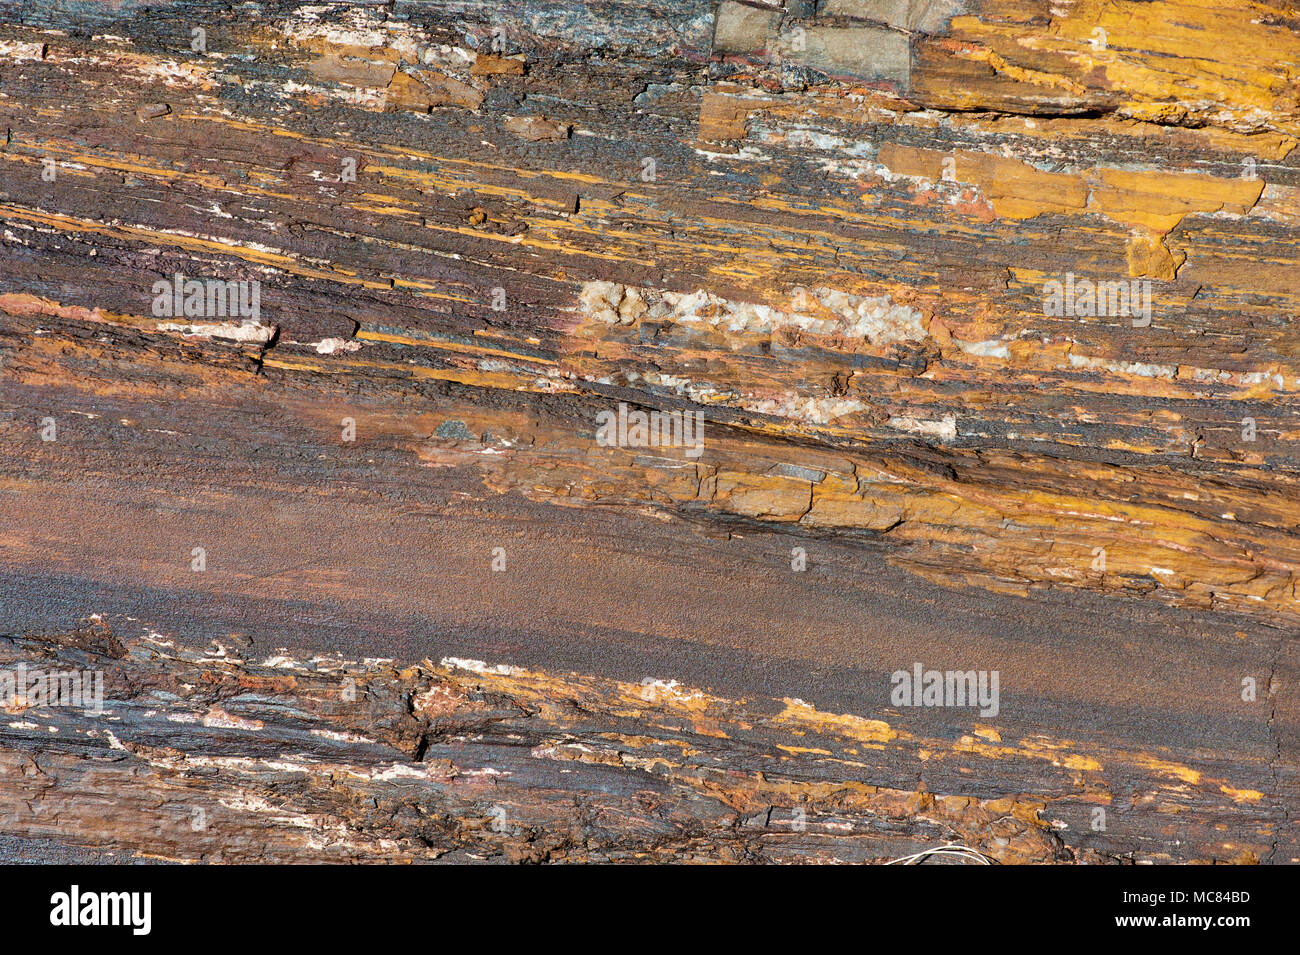 Petrified wood close-up in the Wolverine Petrified Wood Natural Area (unofficial name) in central Utah Stock Photo